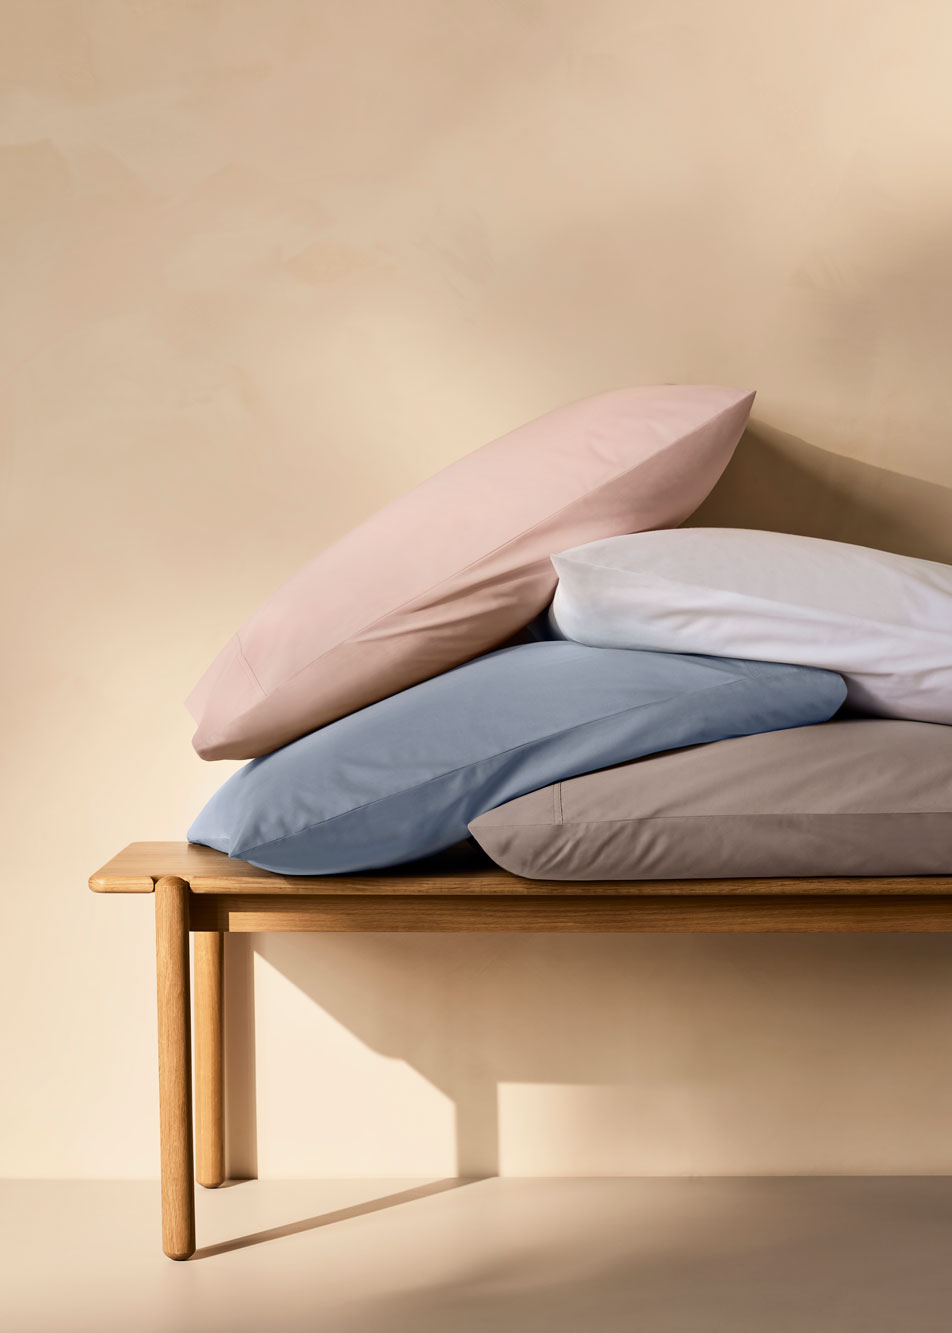 A stack of pillows sits on a timber bench. Each pillow has a Byren pillowcase in a different shade: pink, white, blue and grey